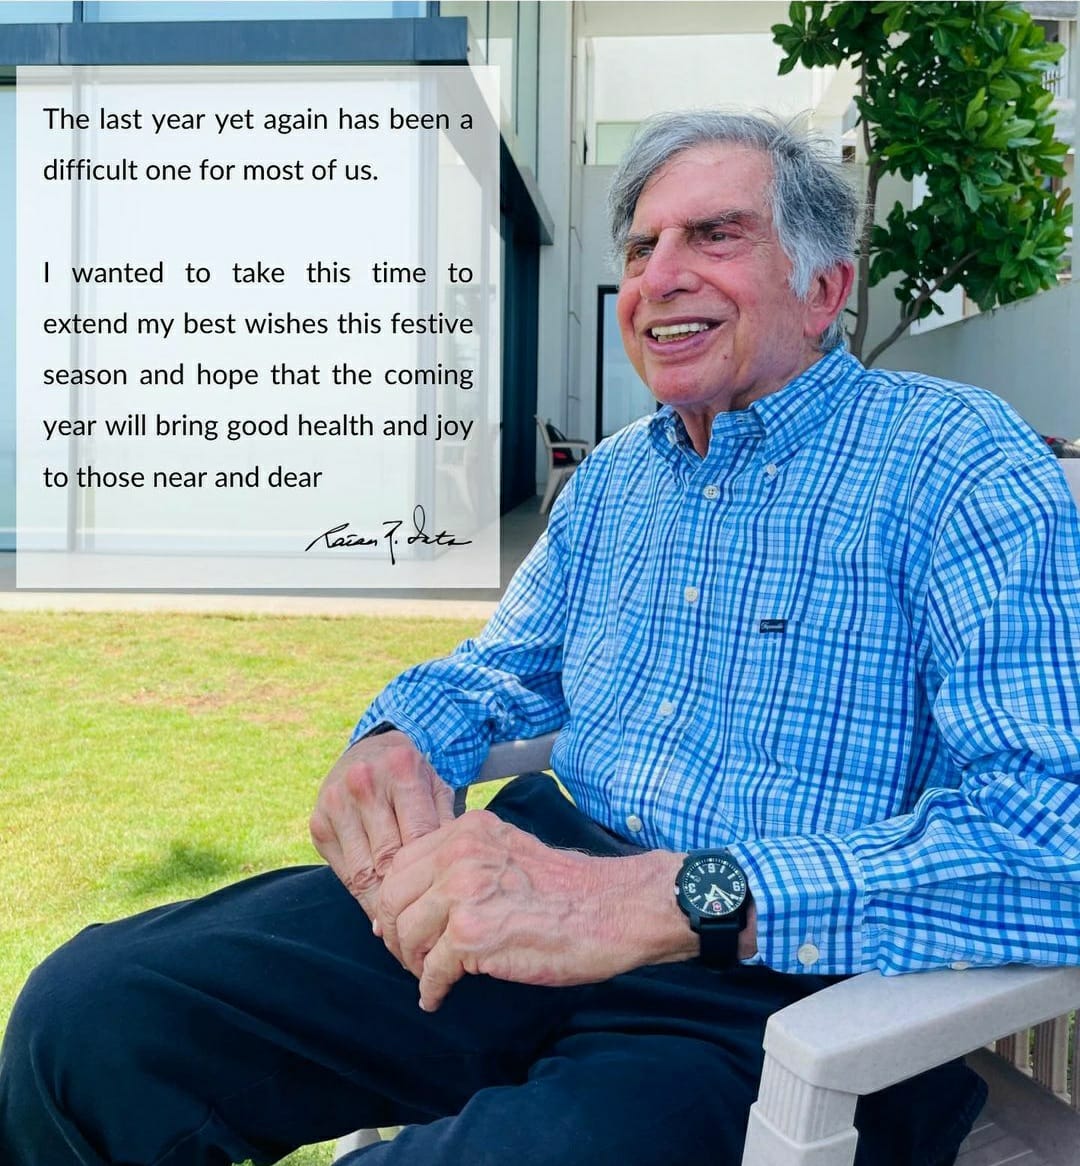 Ratan Tata celebrates 84th birthday with cupcake, song from assistant. Watch